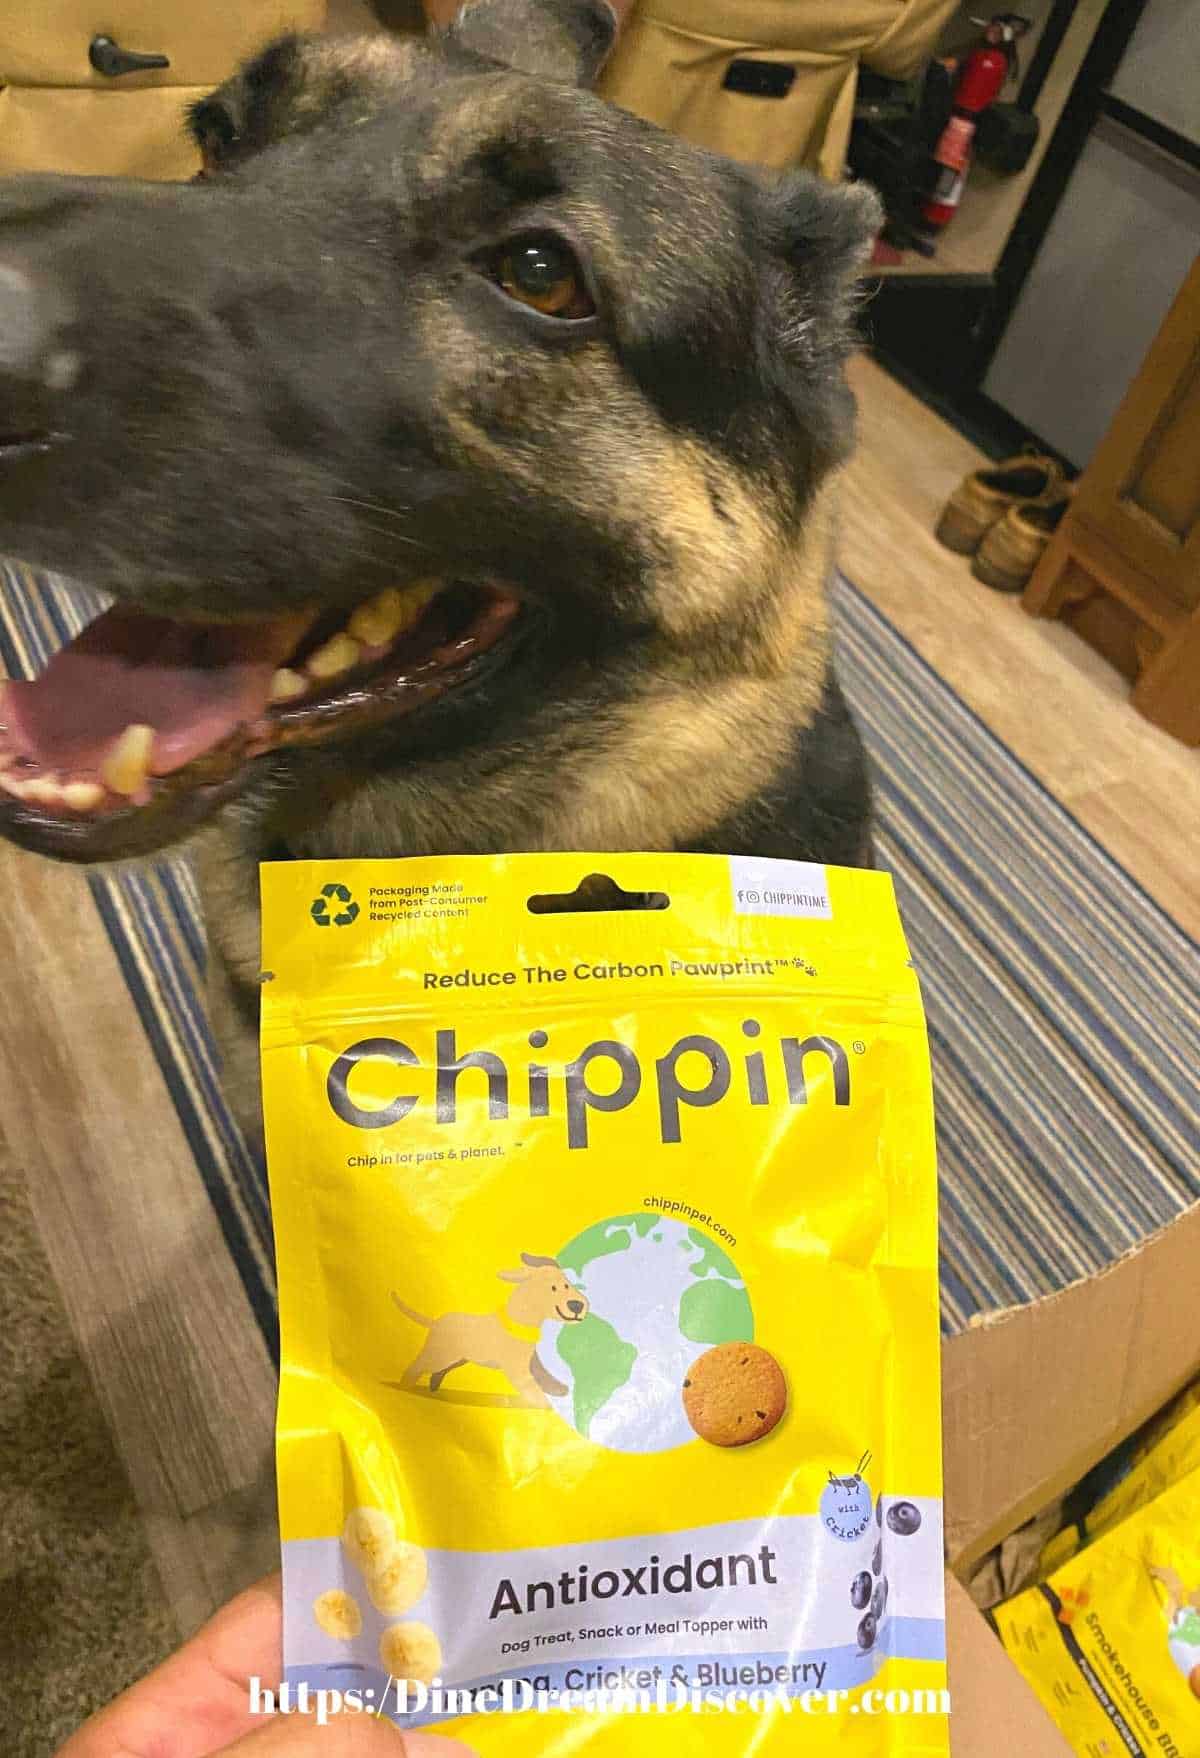 Chippin Dog Food and Cricket Treats Every Dog Will Love